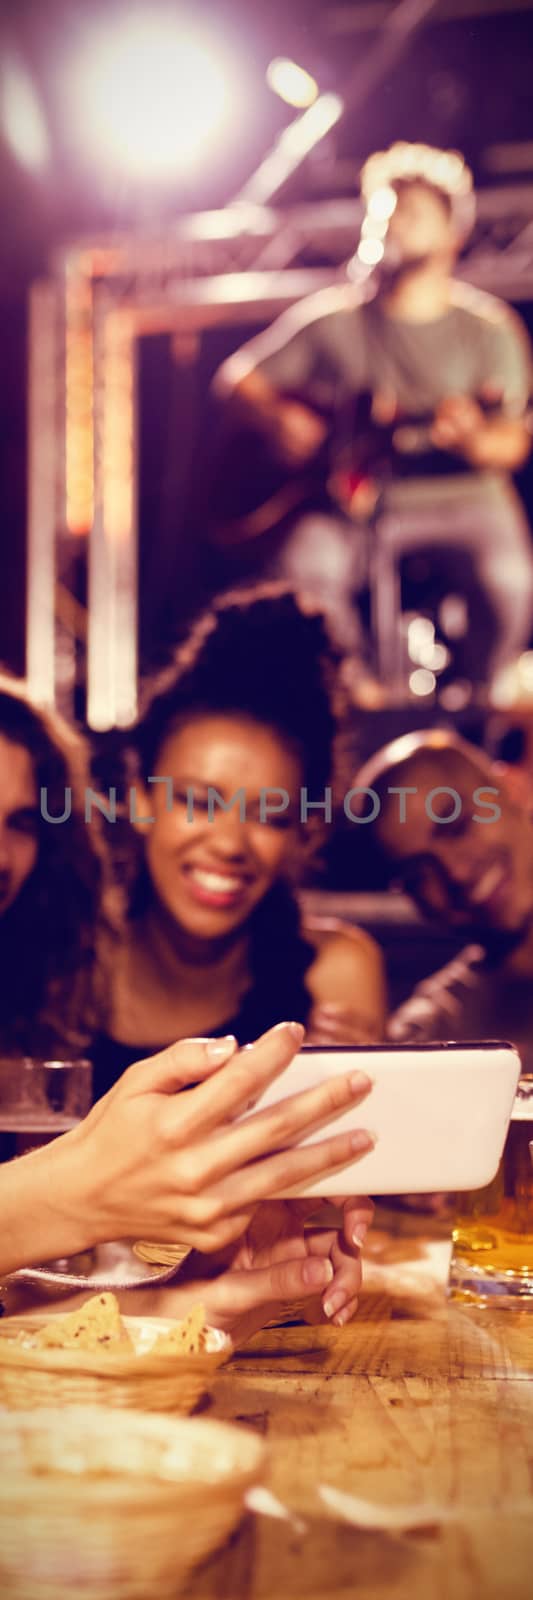 Woman showing smart phone to friends while sitting at table in nightclub